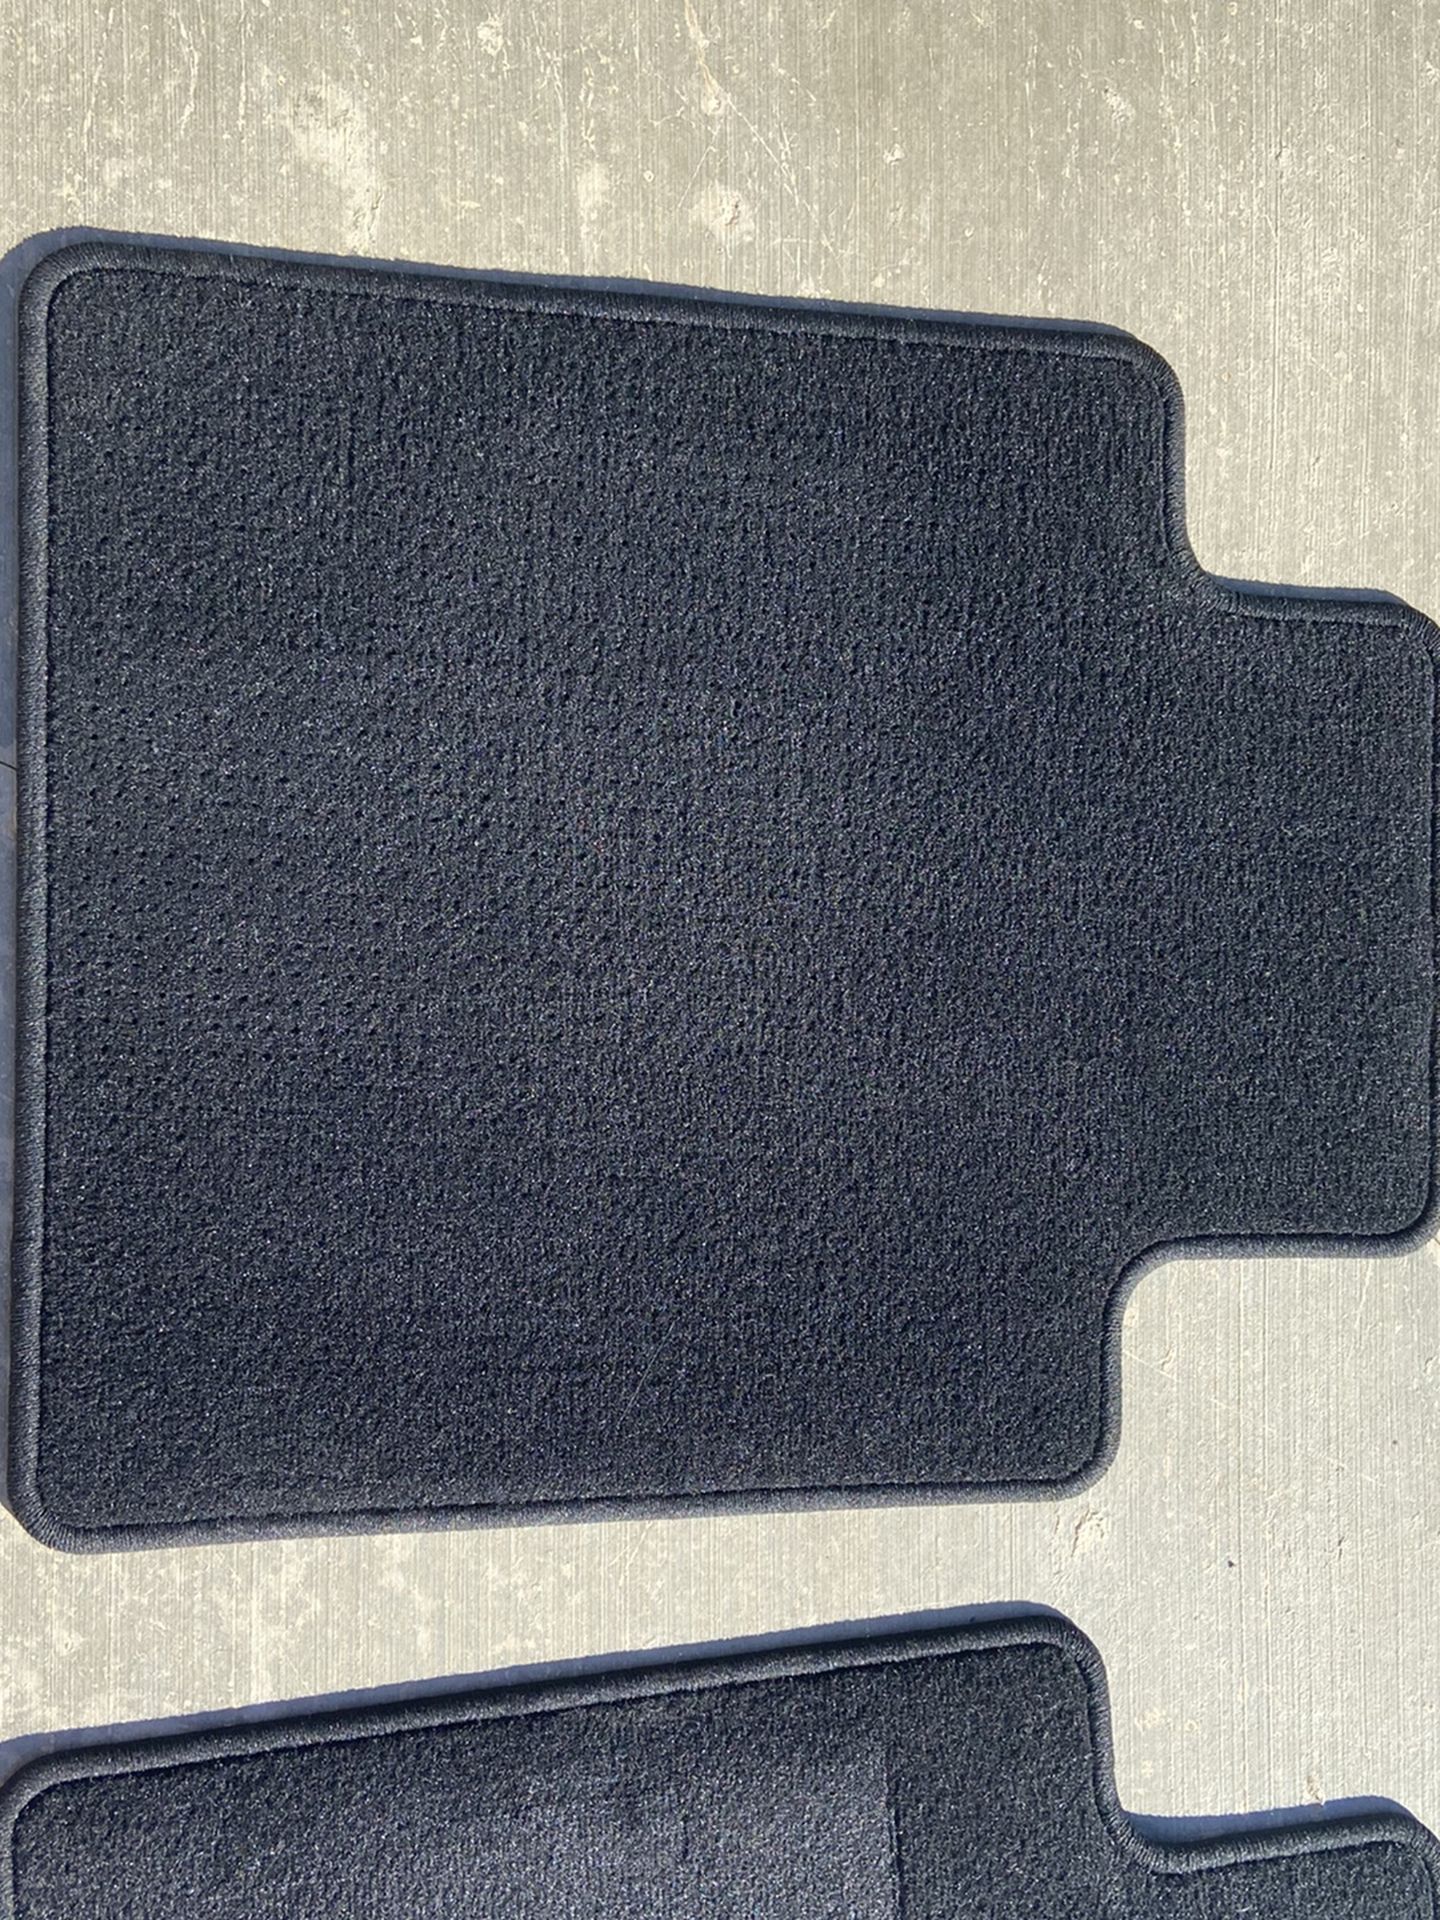 Floor Mats 2018 Ford F250 Crew Can $10 OBO